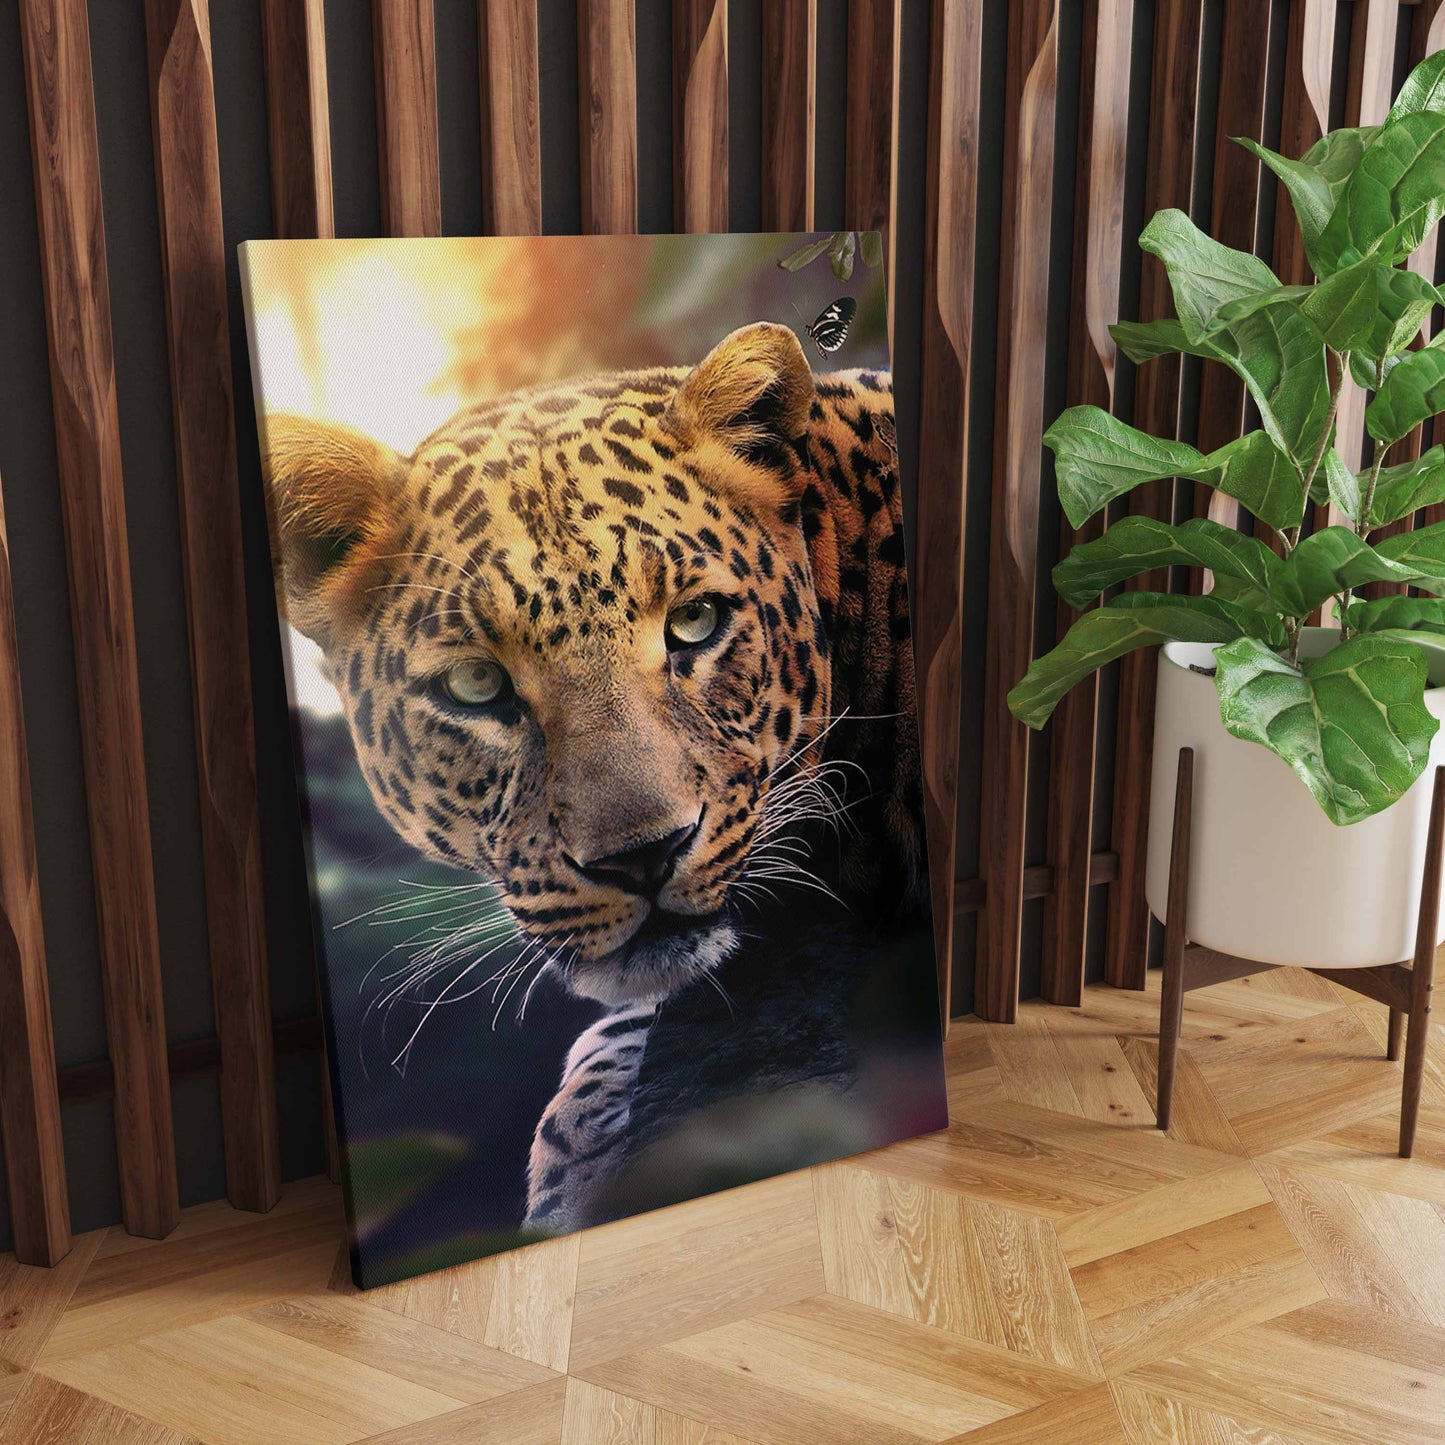 Whimsical Nordic Wildlife, Adorable Lion, Tiger, and Leopard Poster for Playful Home Decor in Bedrooms, Corridors, and Living Spaces S04E10